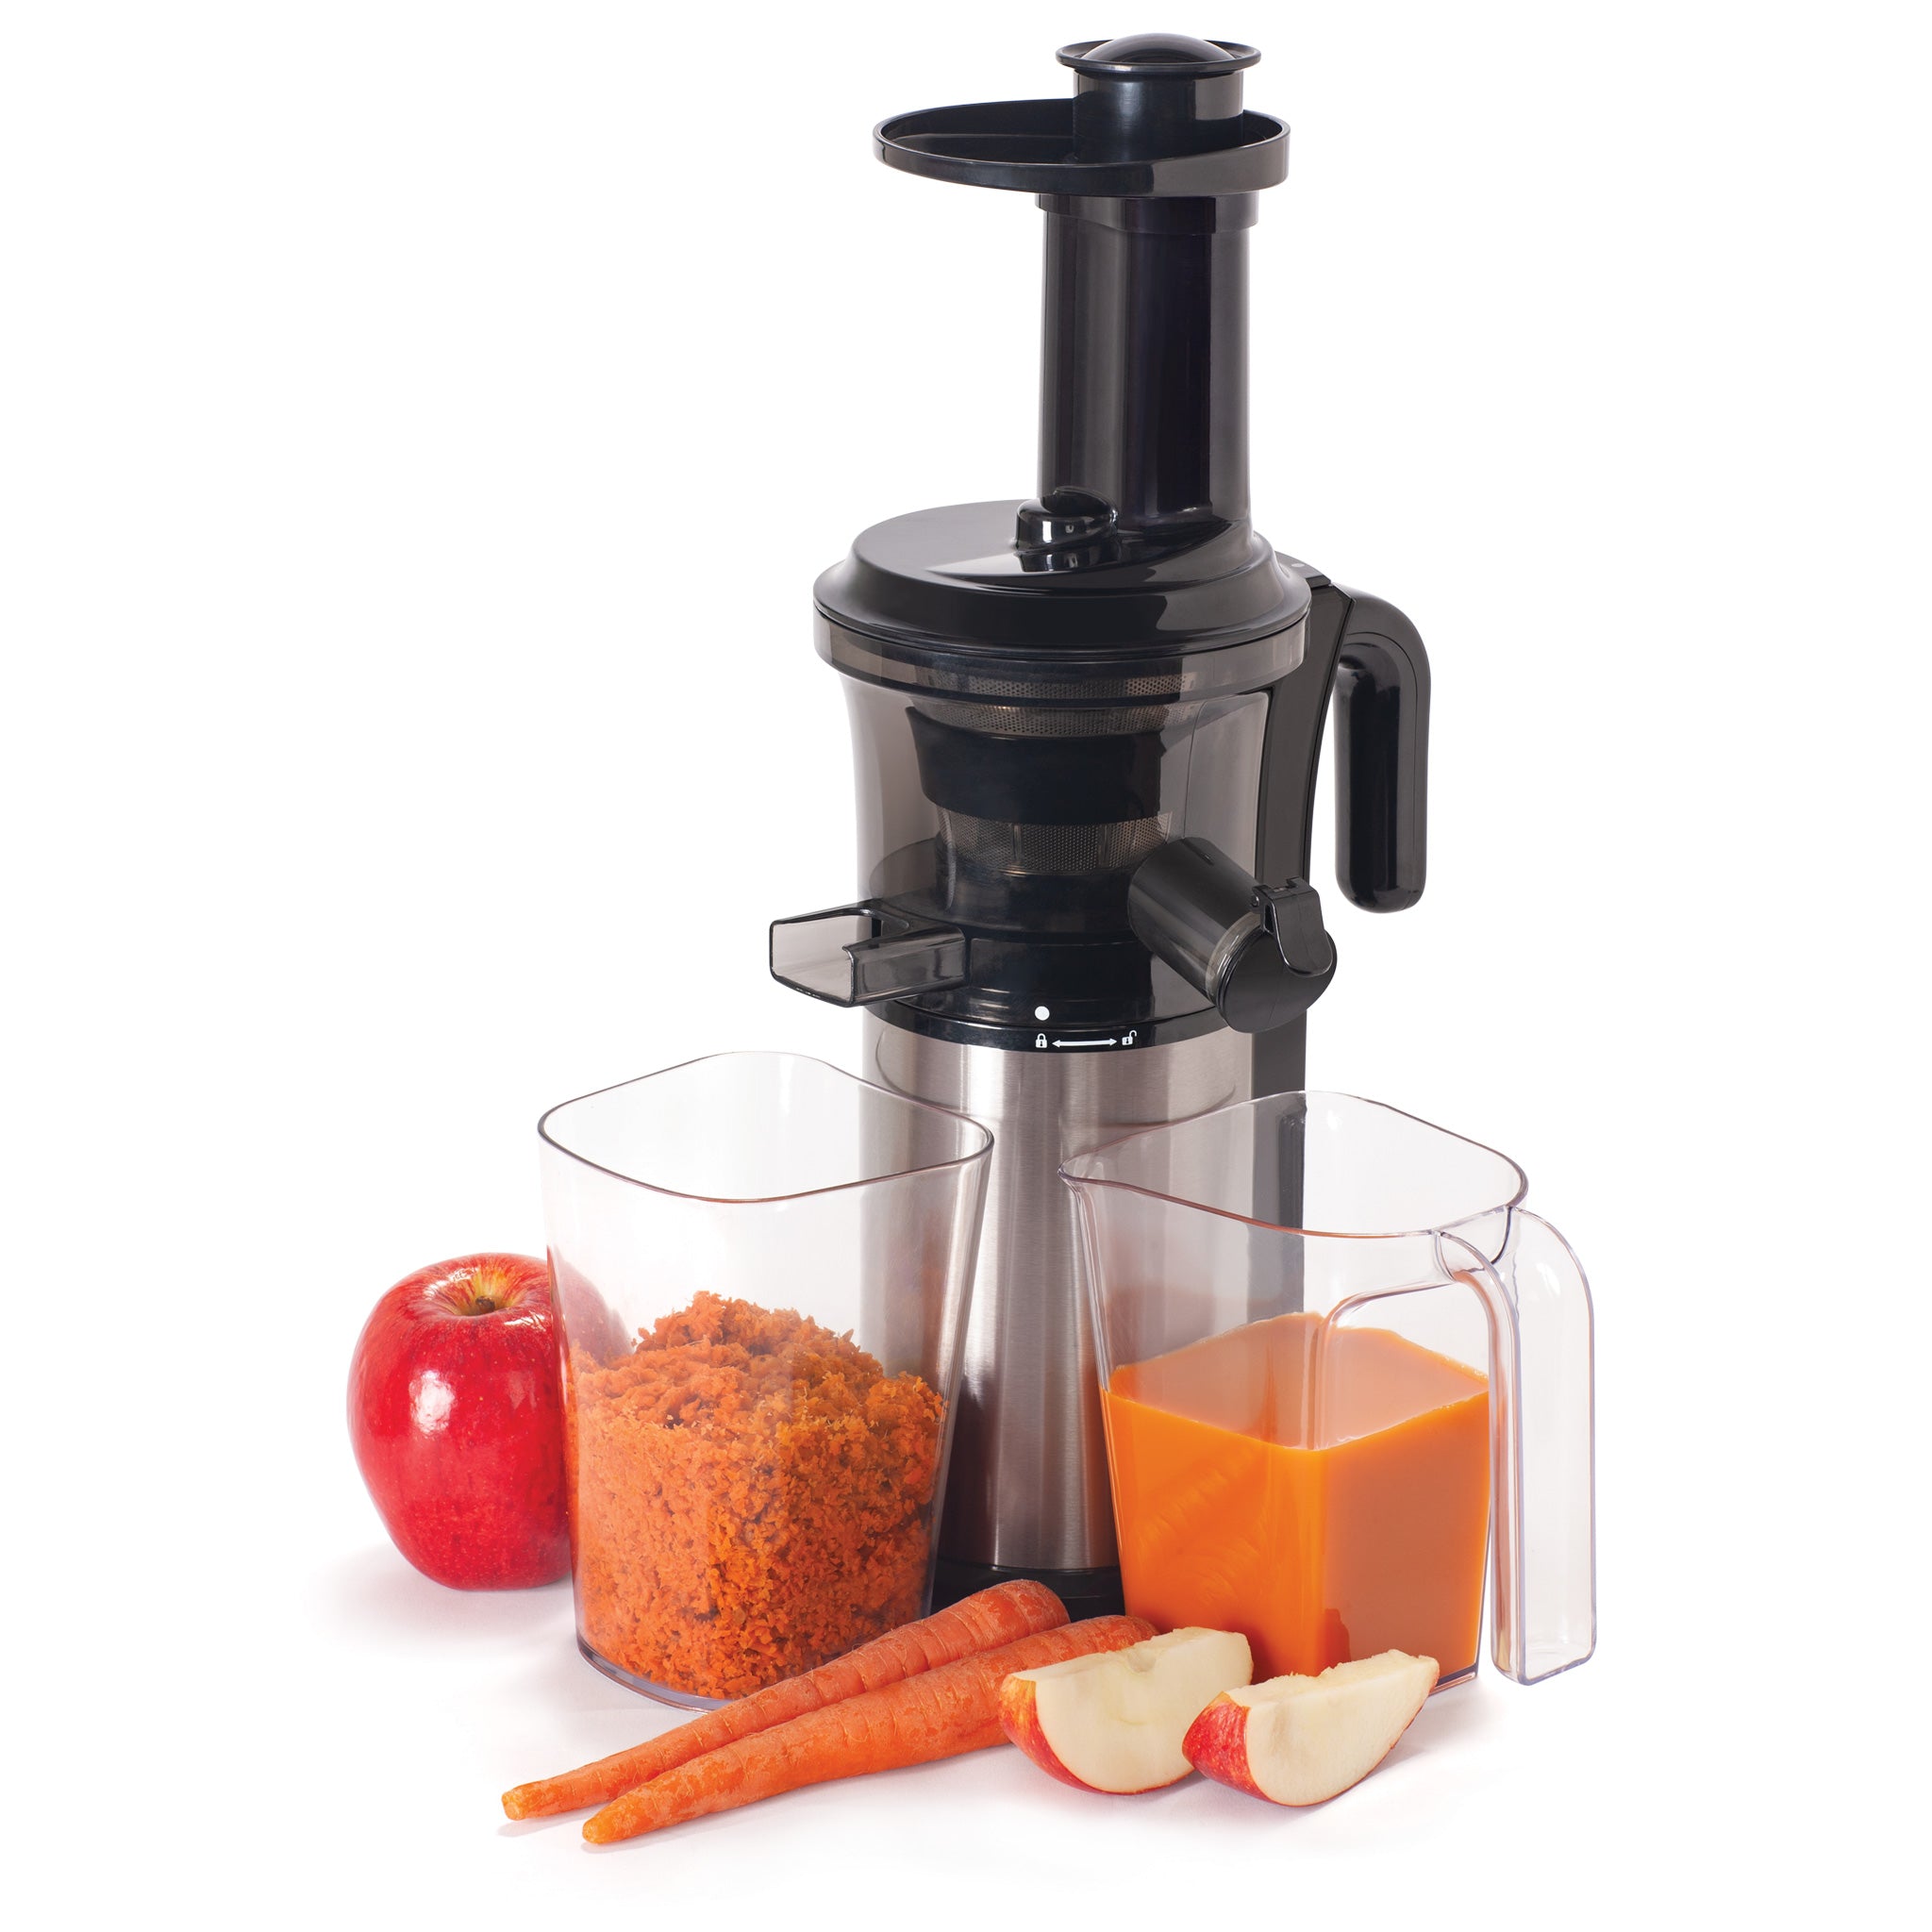 Ninja Cold Press Juicer review: The ultimate sub-£200 slow juicer